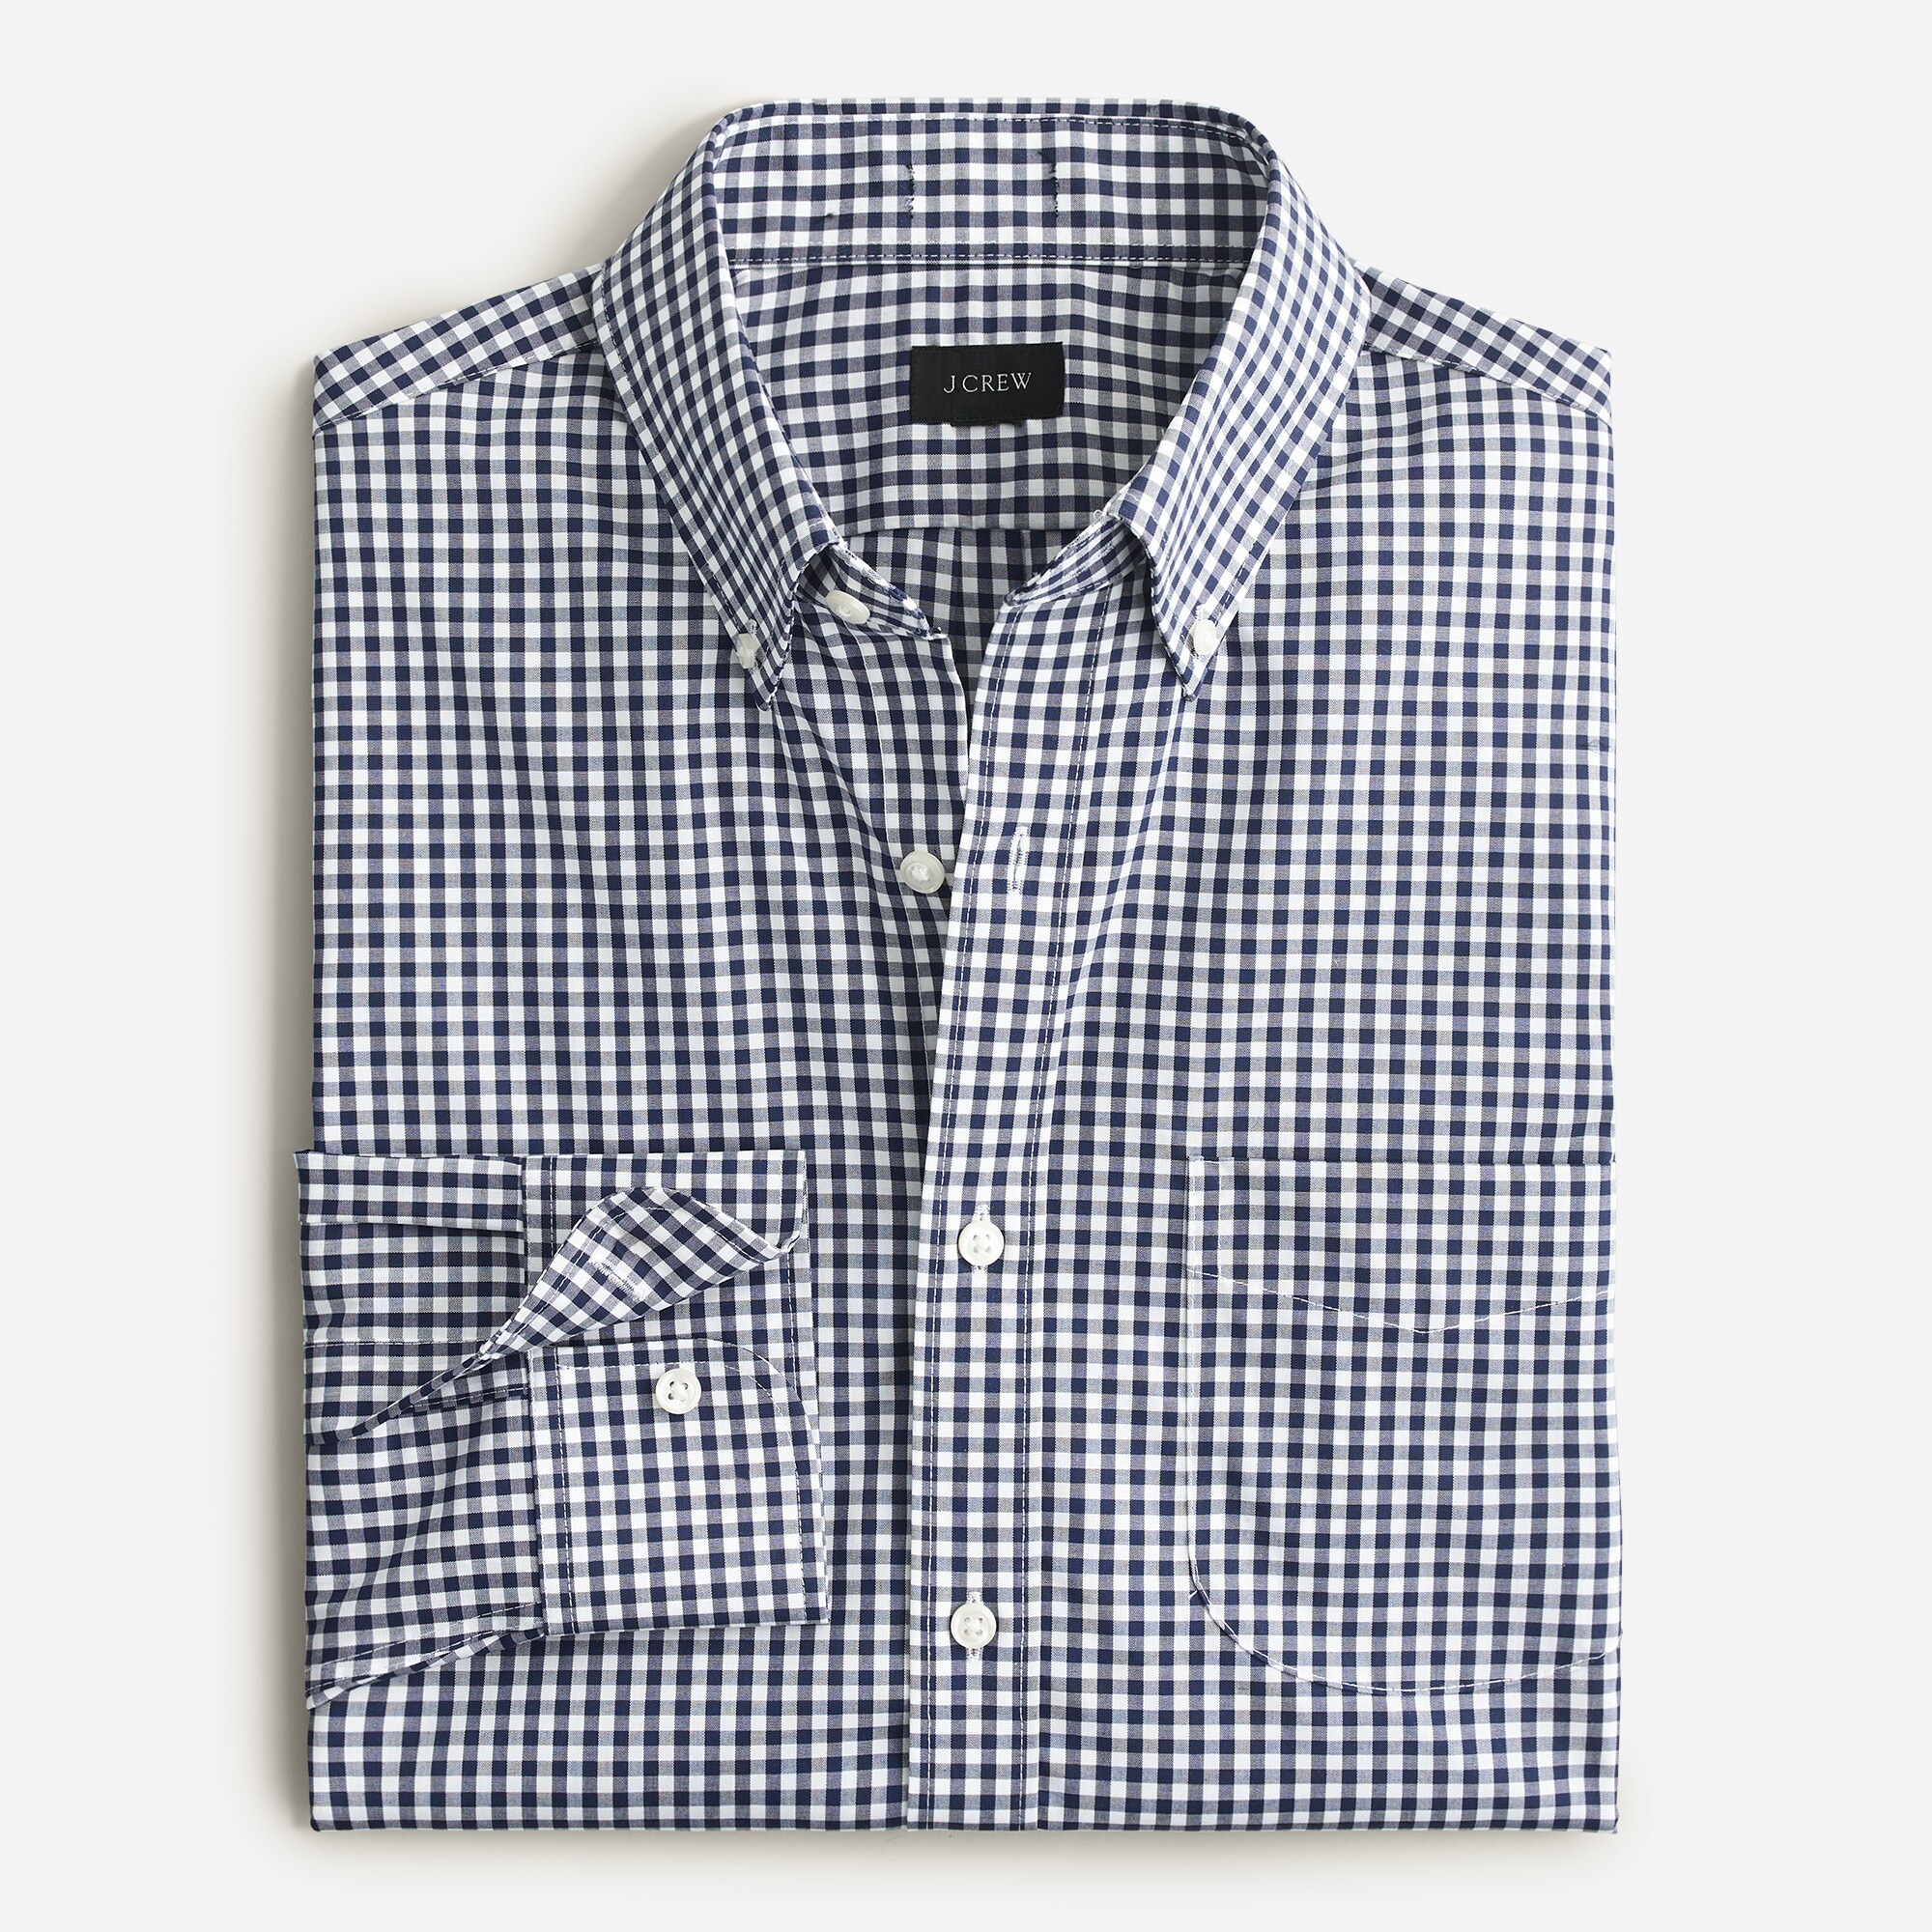  Bowery wrinkle-free stretch cotton shirt in gingham